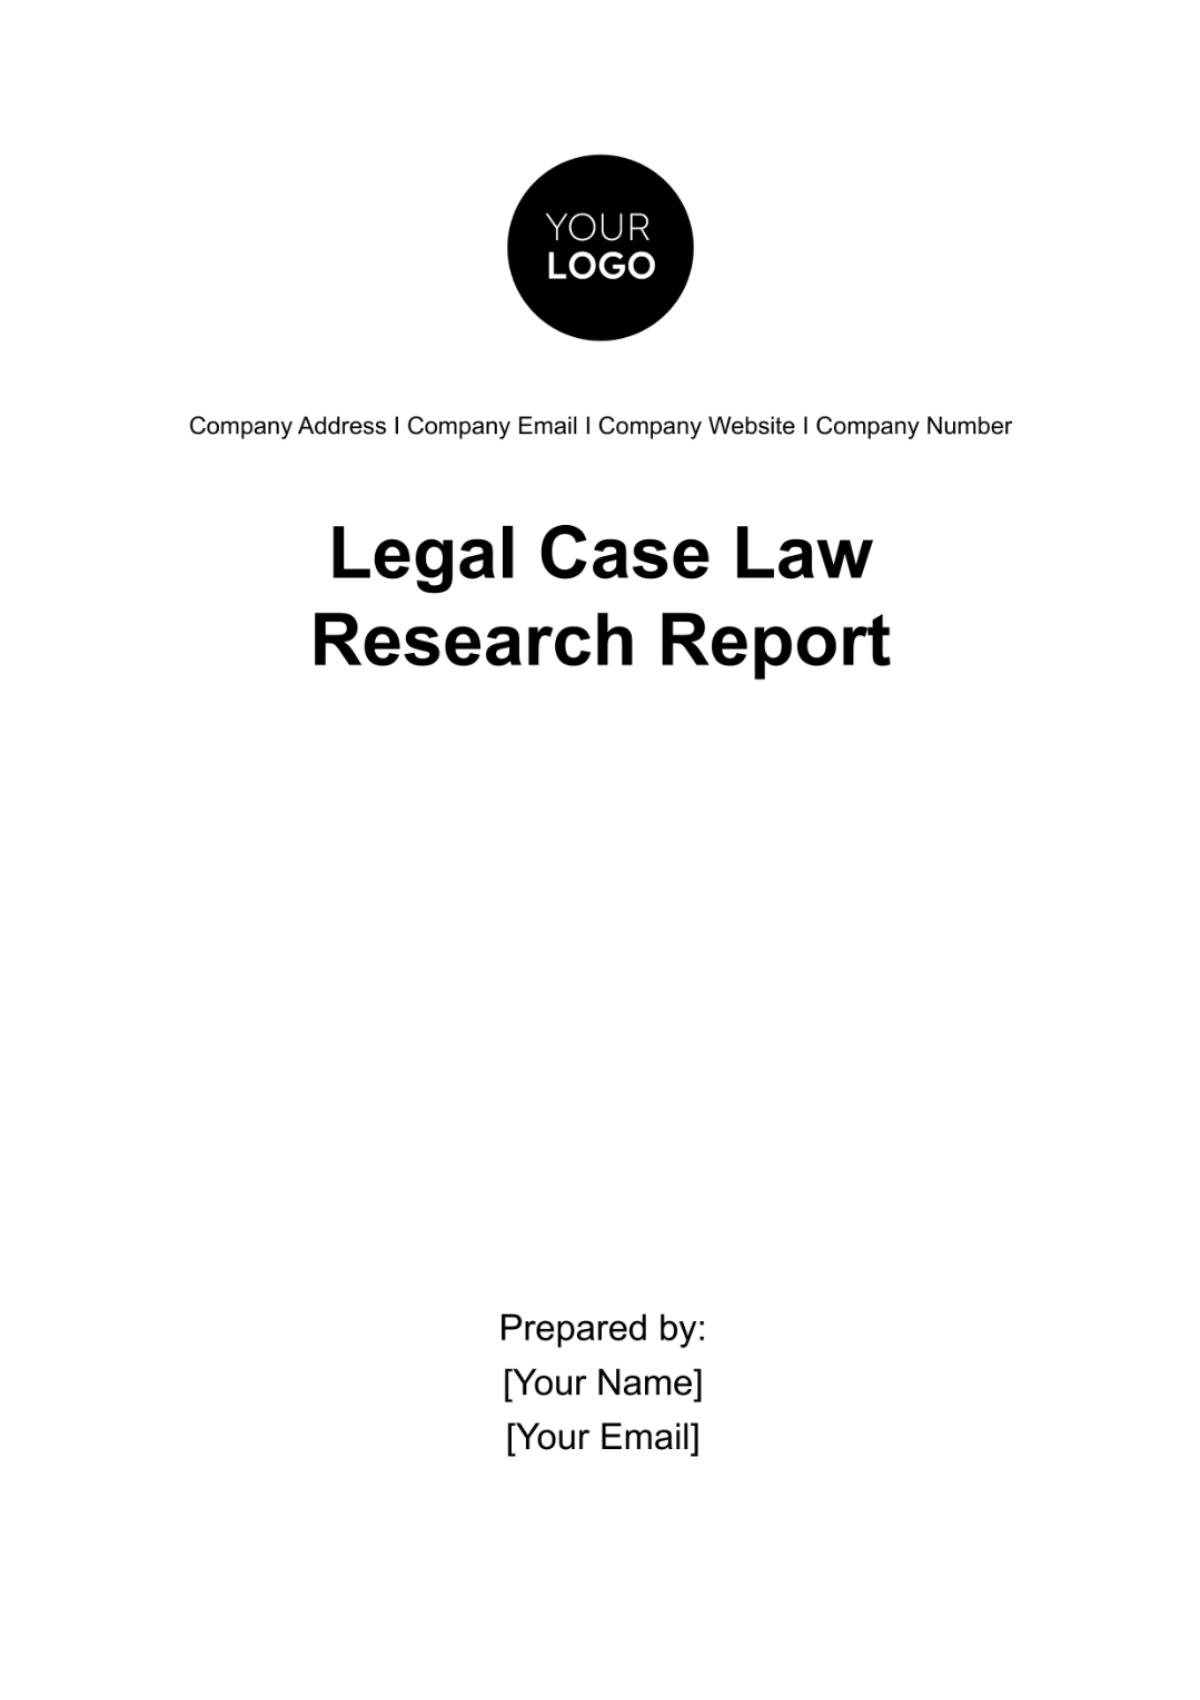 Free Legal Case Law Research Report Template